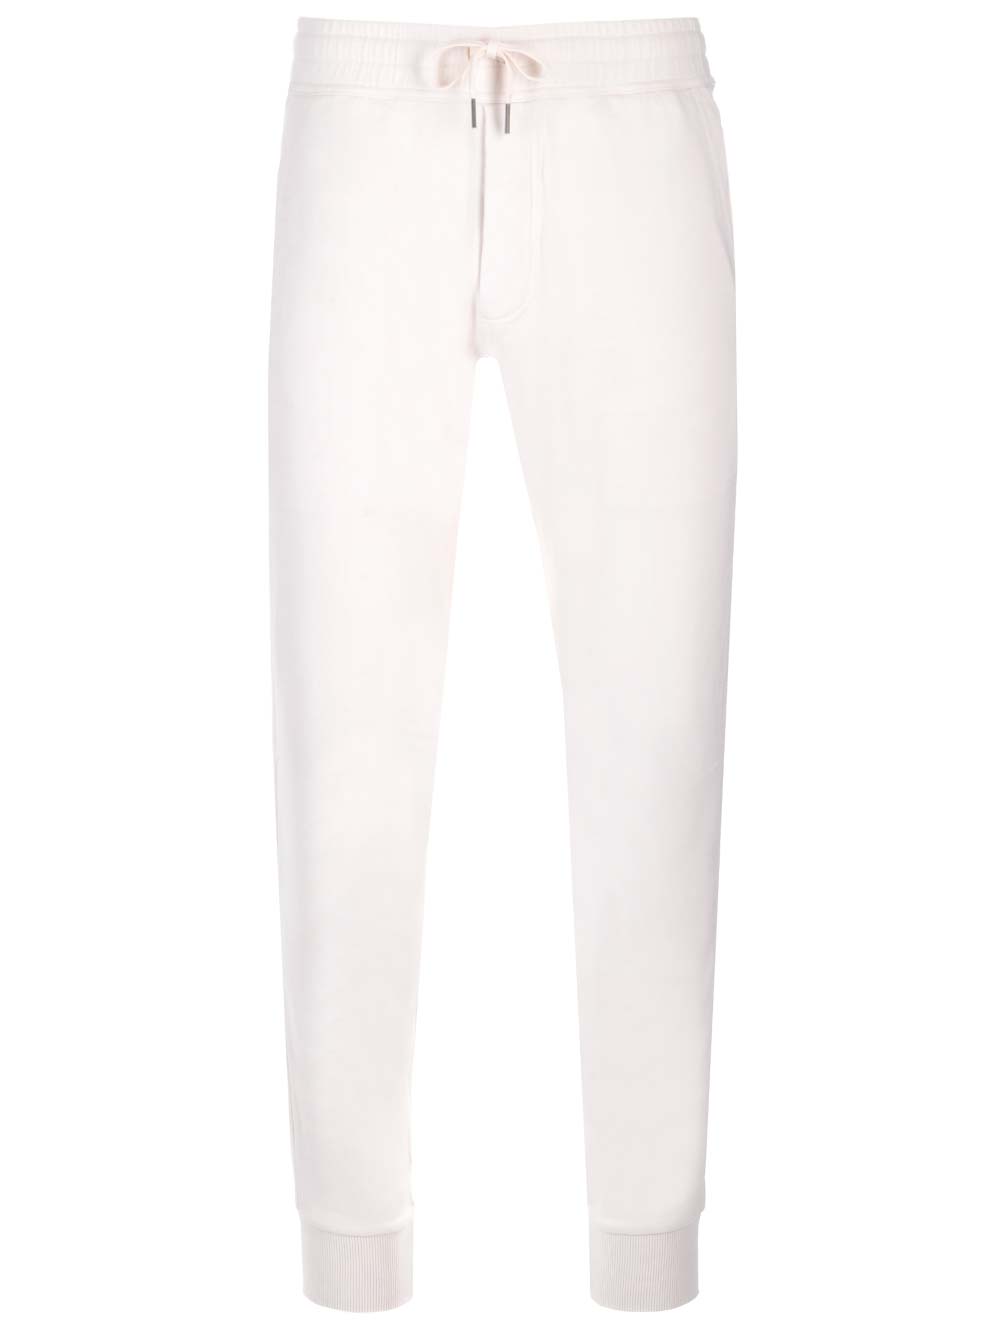 TOM FORD WHITE LOUNGE TROUSERS